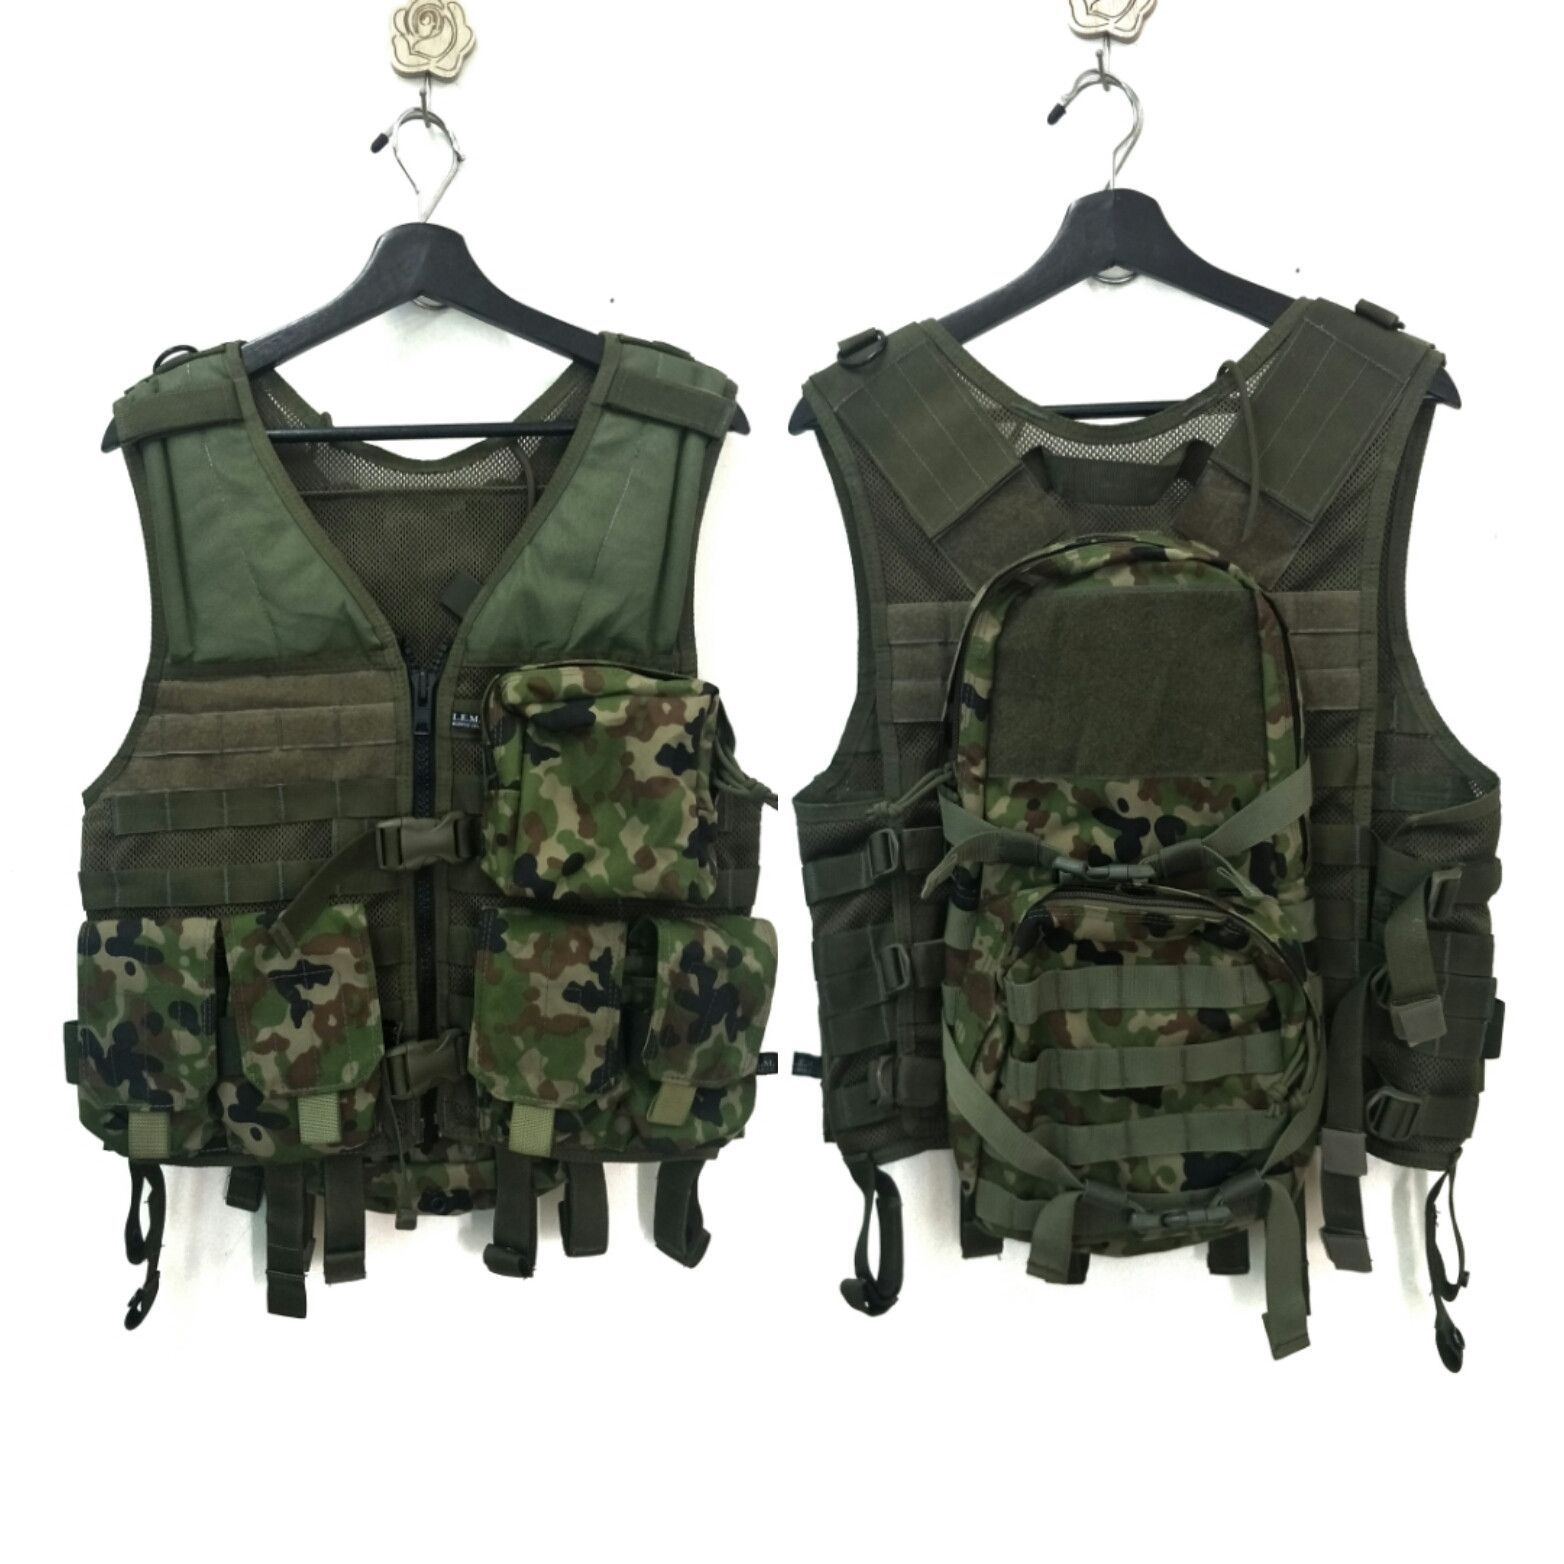 Japanese Brand - Tactical Military Camo Heavy Vest Backpack - 1